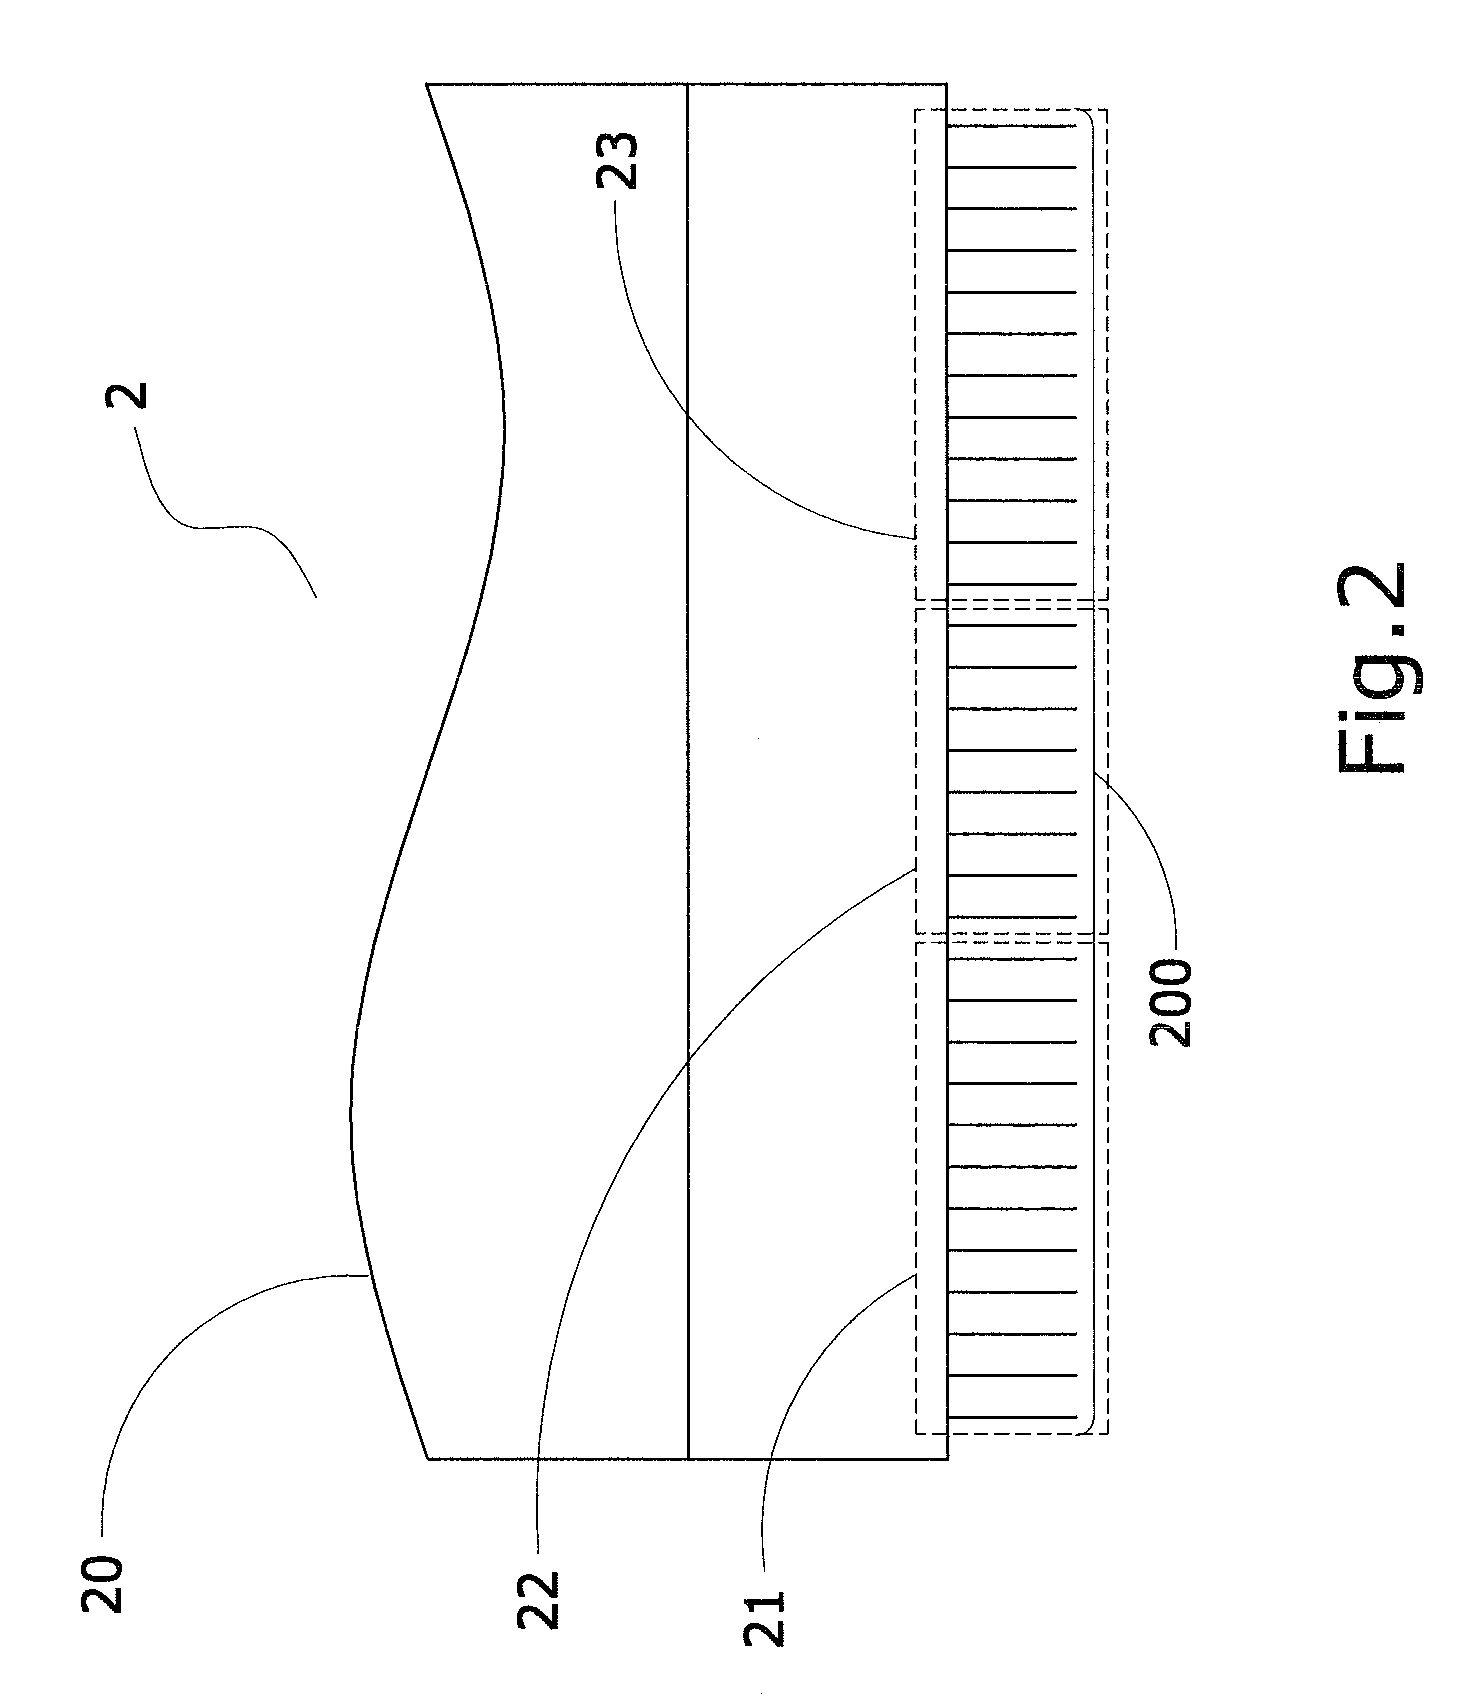 Pin definition layout of electronic paper display screen